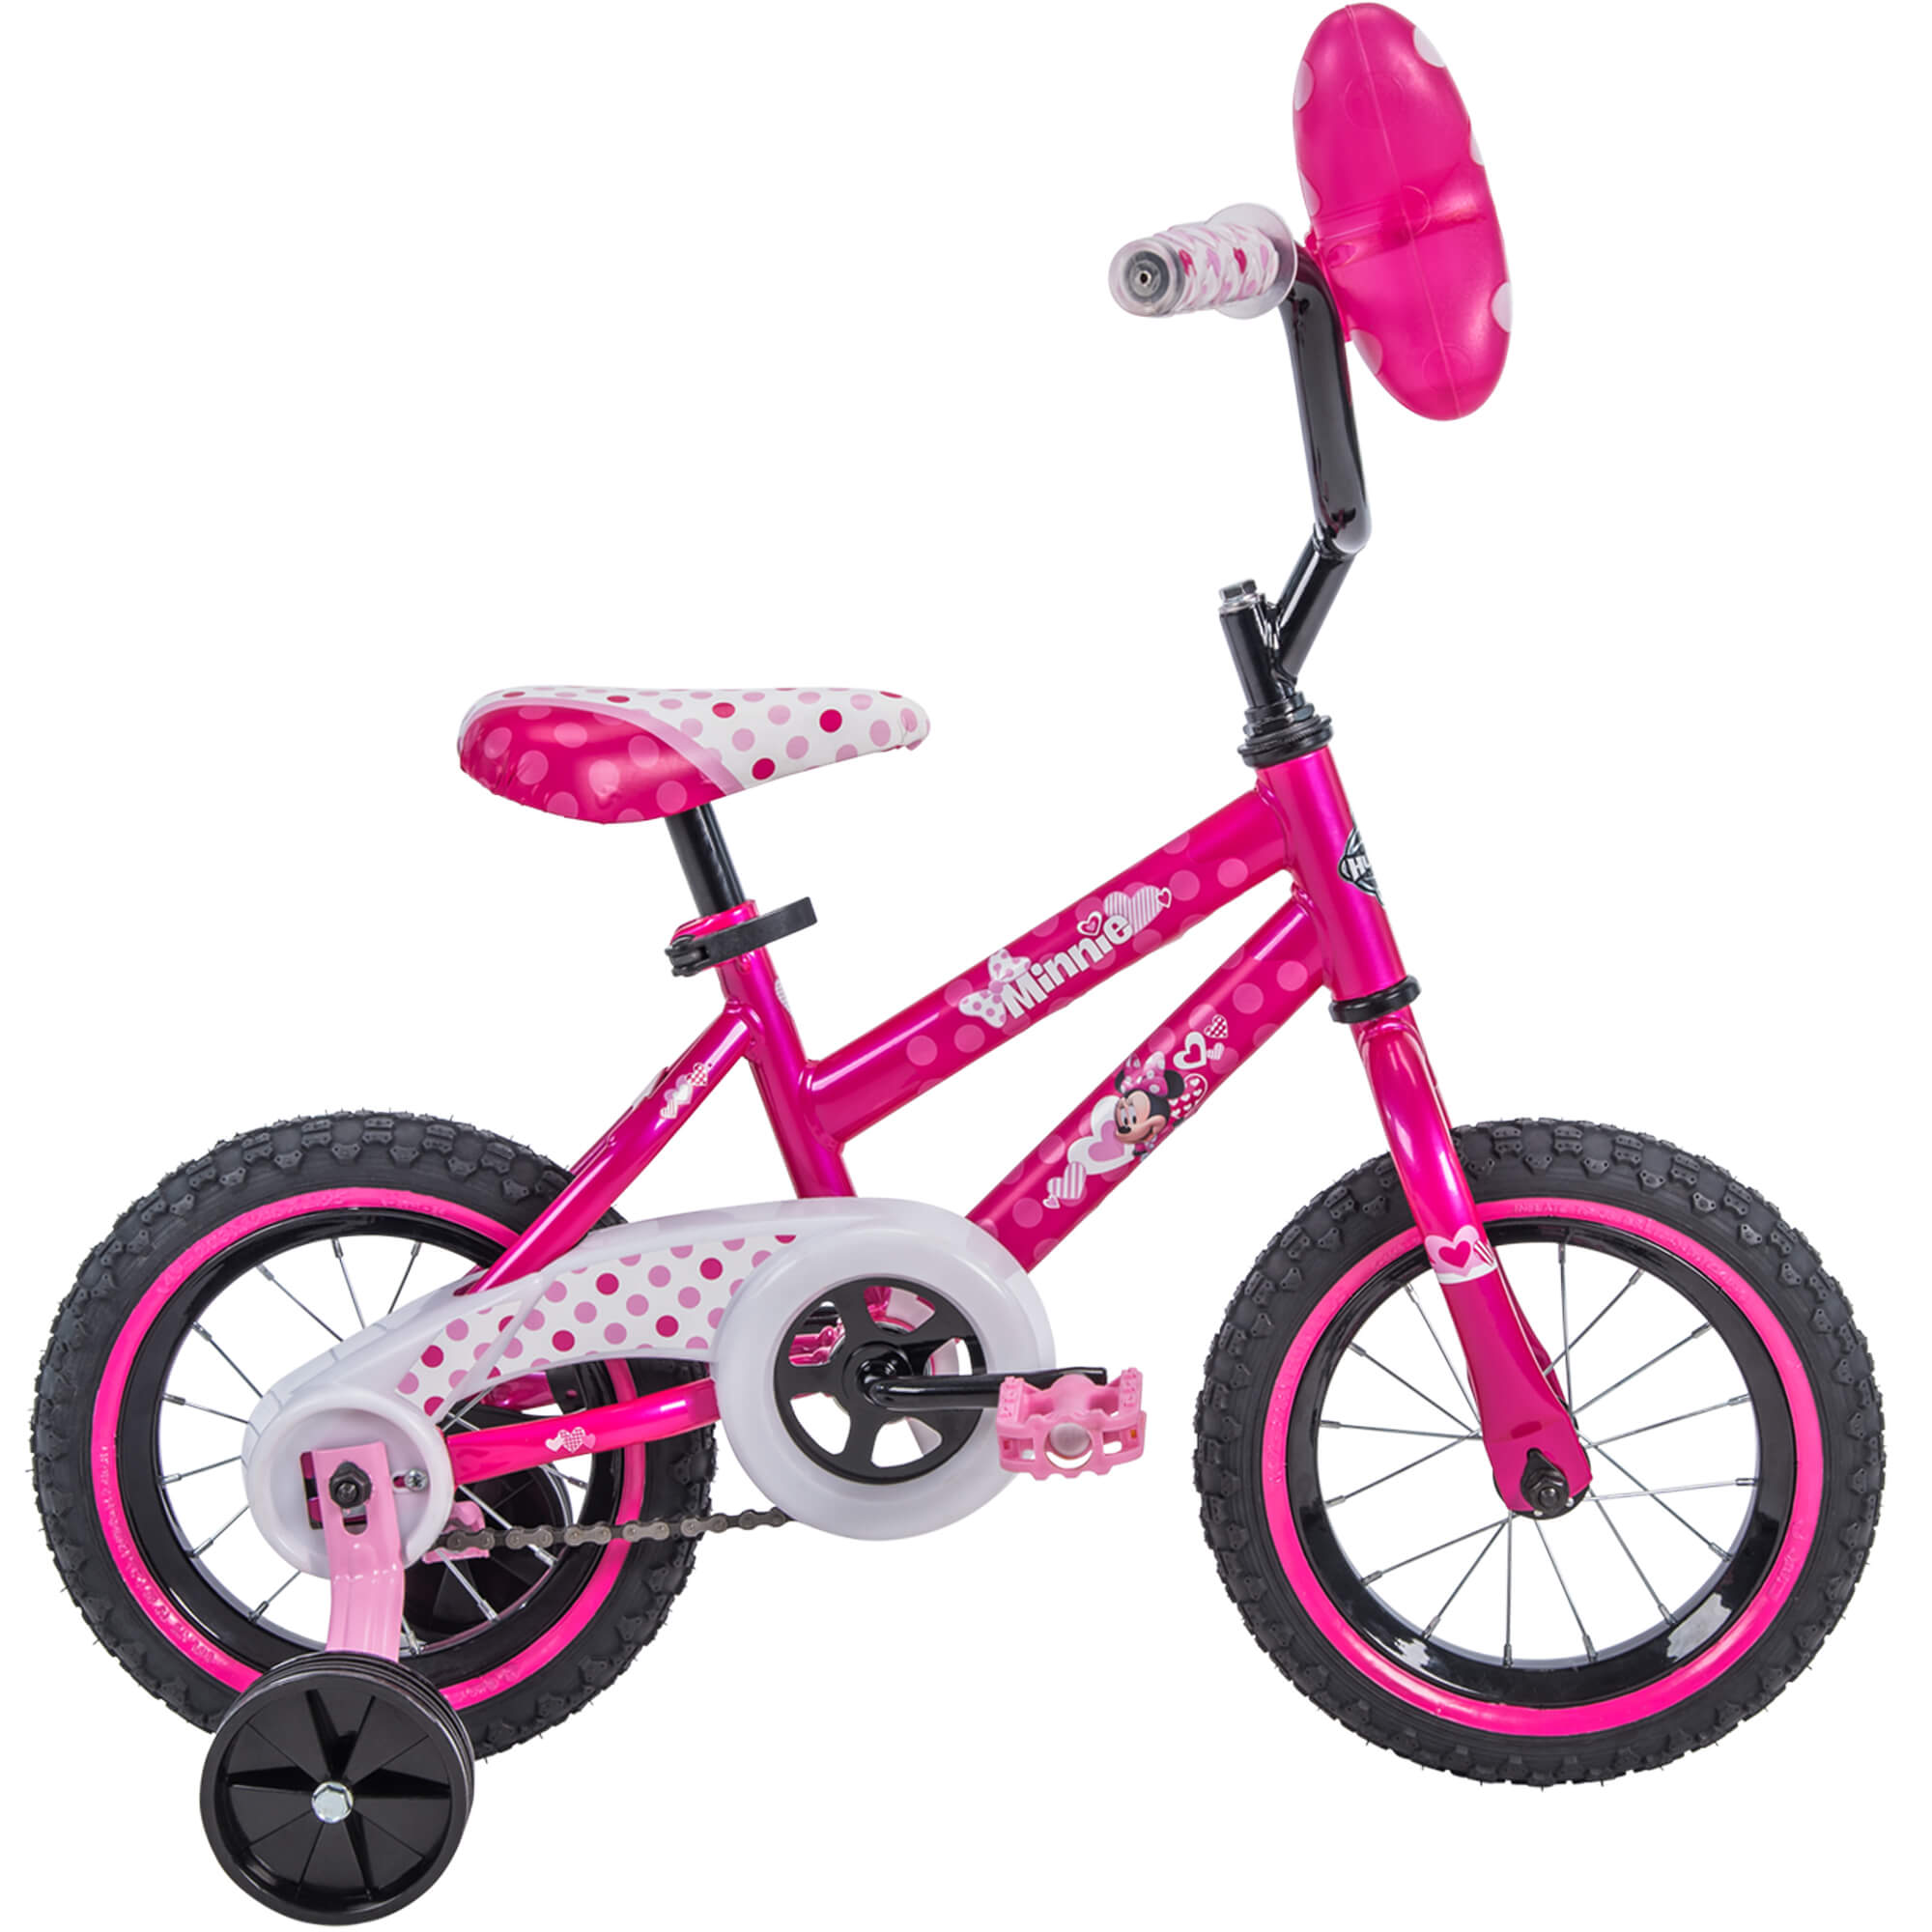 Disney Minnie Mouse 12-inch Bike by Huffy, Pink - image 2 of 6